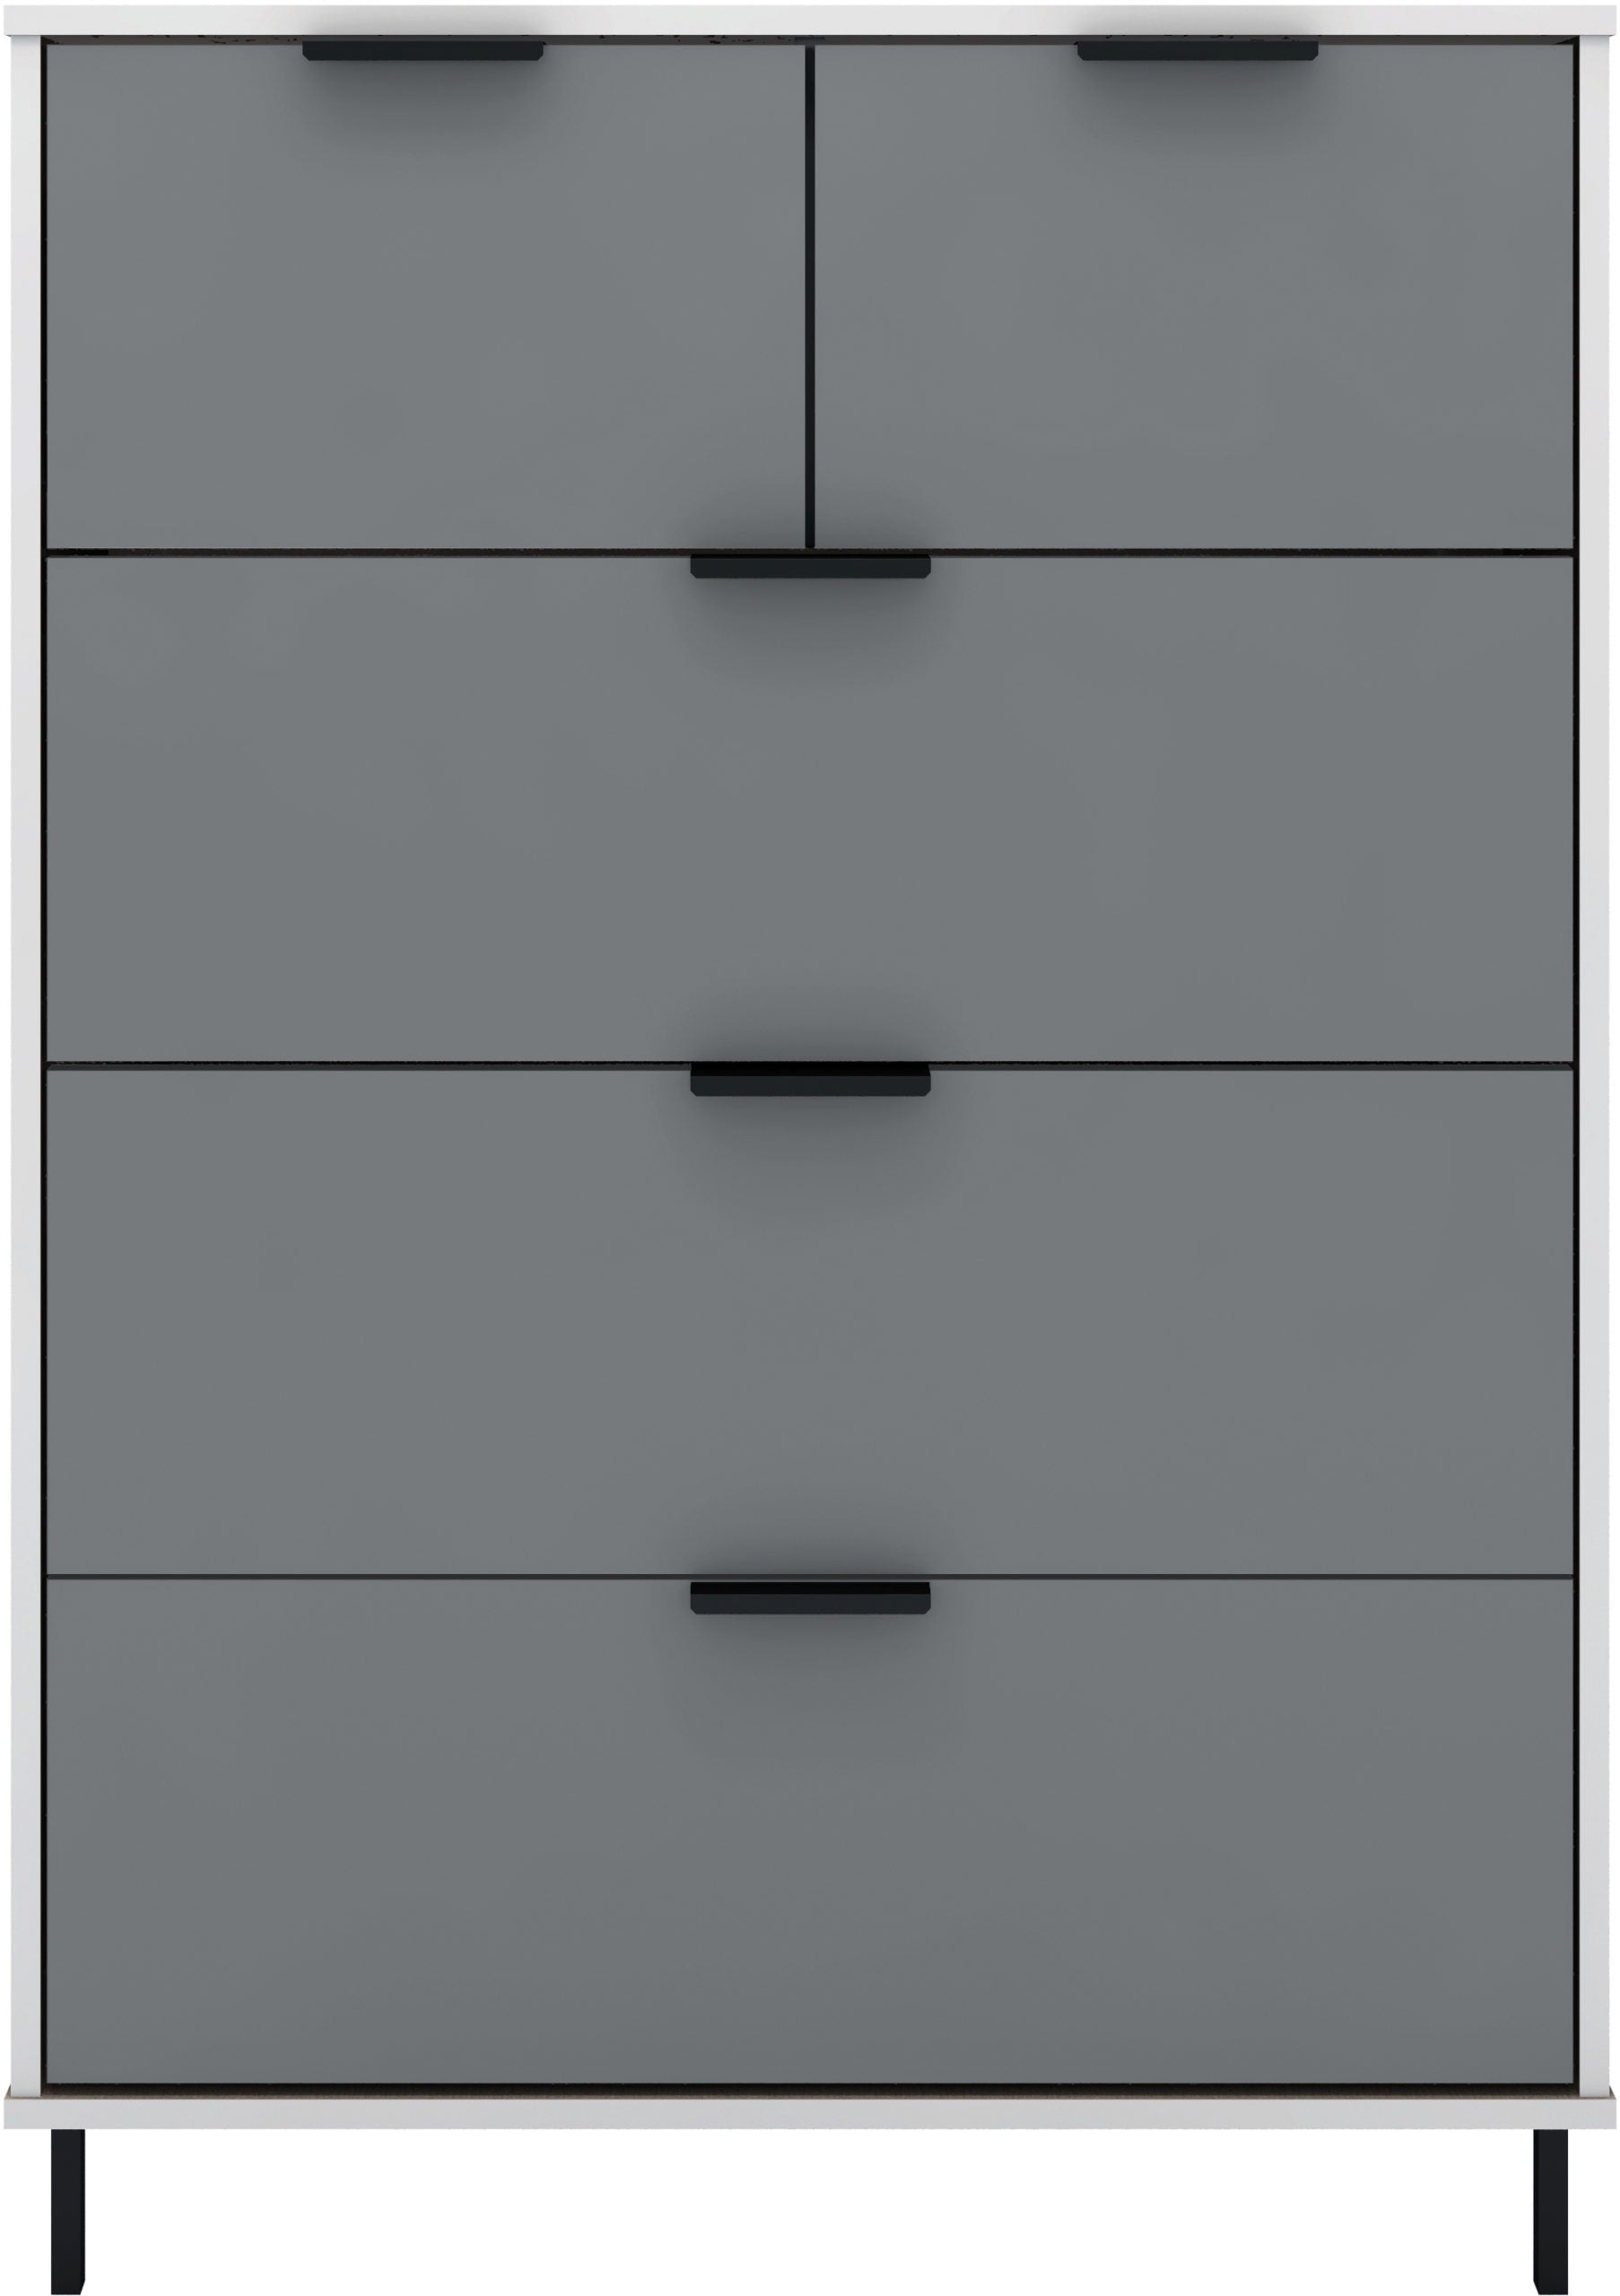 Madrid 3 and 2 Drawer Chest of Drawers in Grey and White Gloss Finish